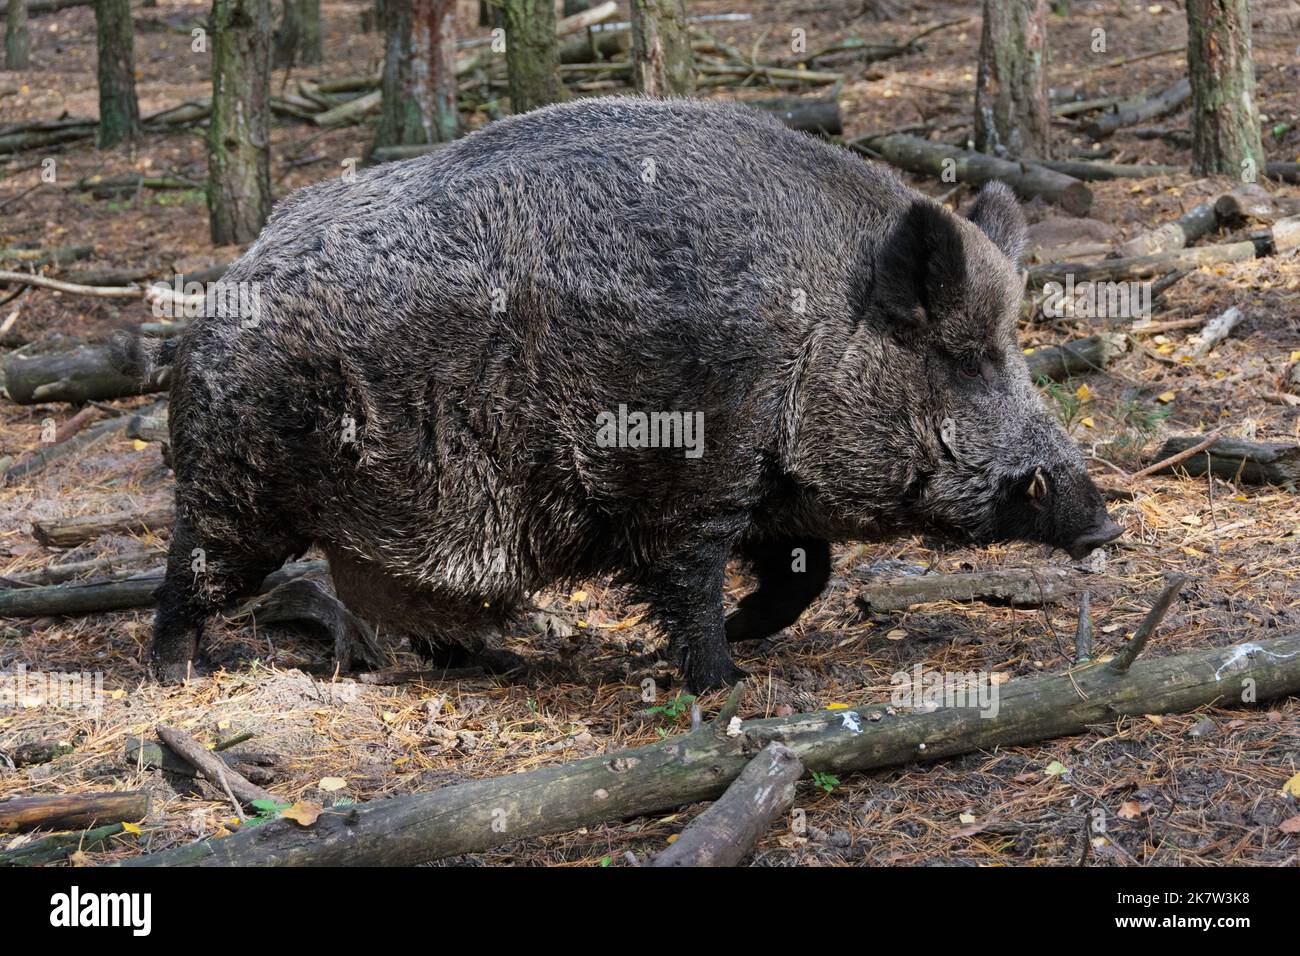 Adult wild boar in the forest Stock Photo